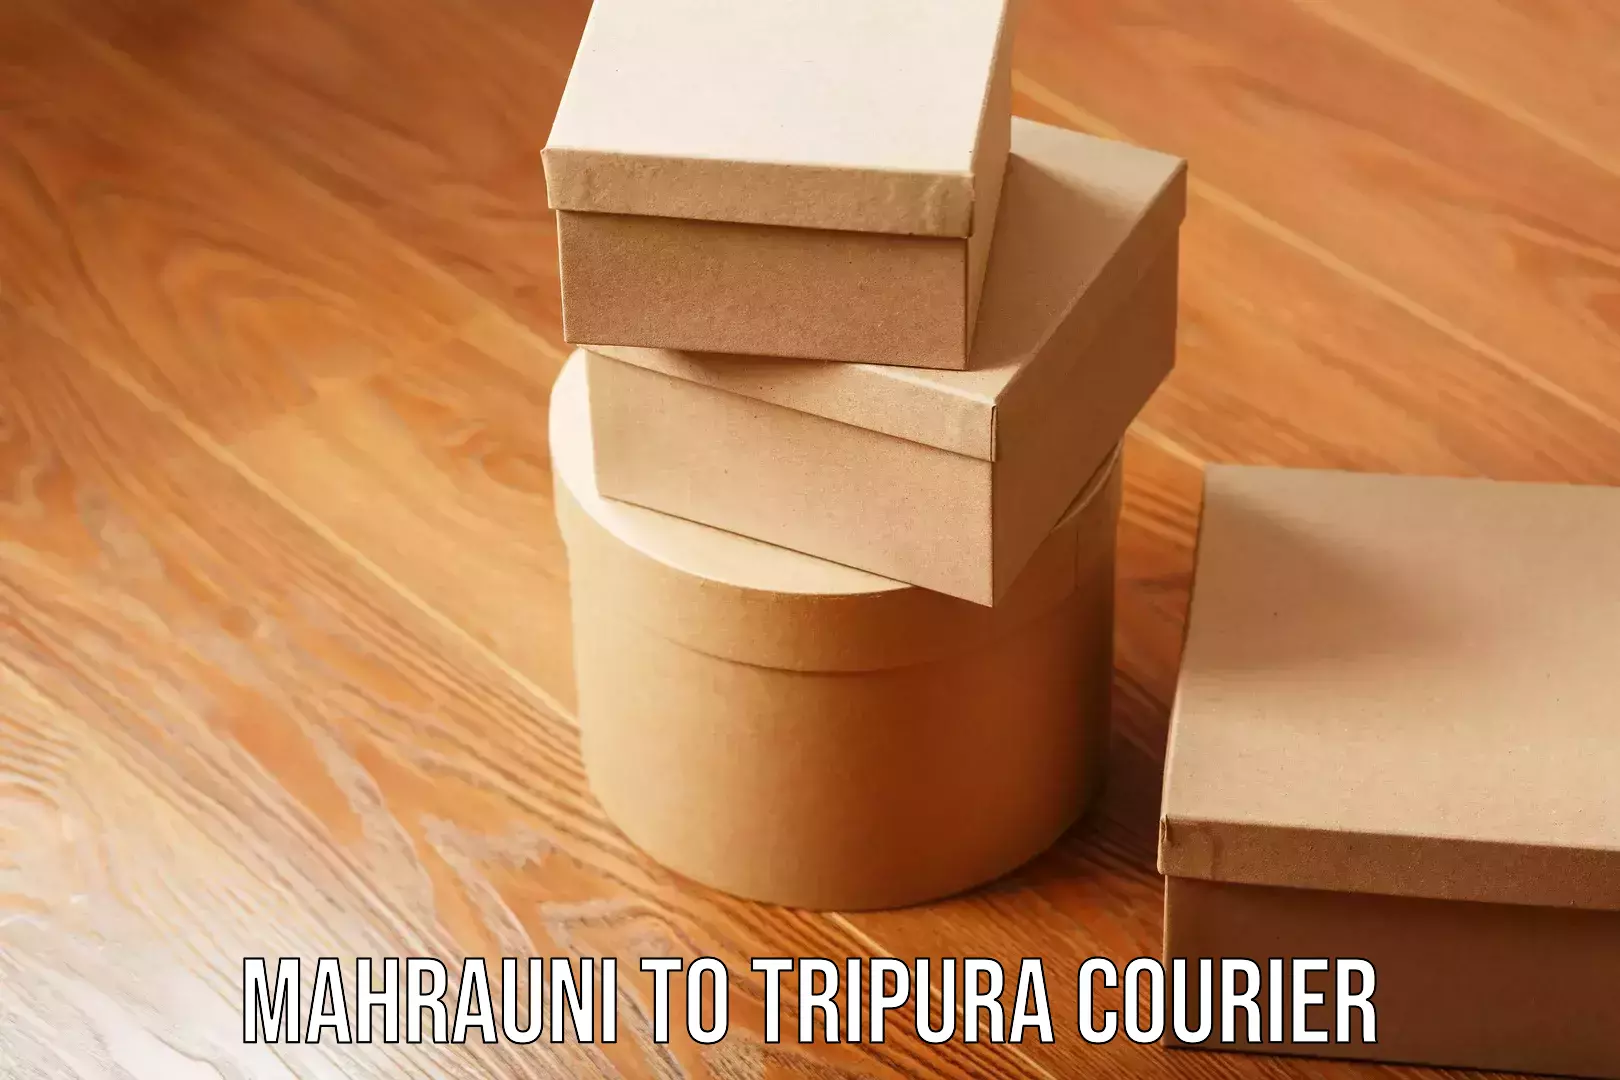 Budget-friendly movers in Mahrauni to Tripura